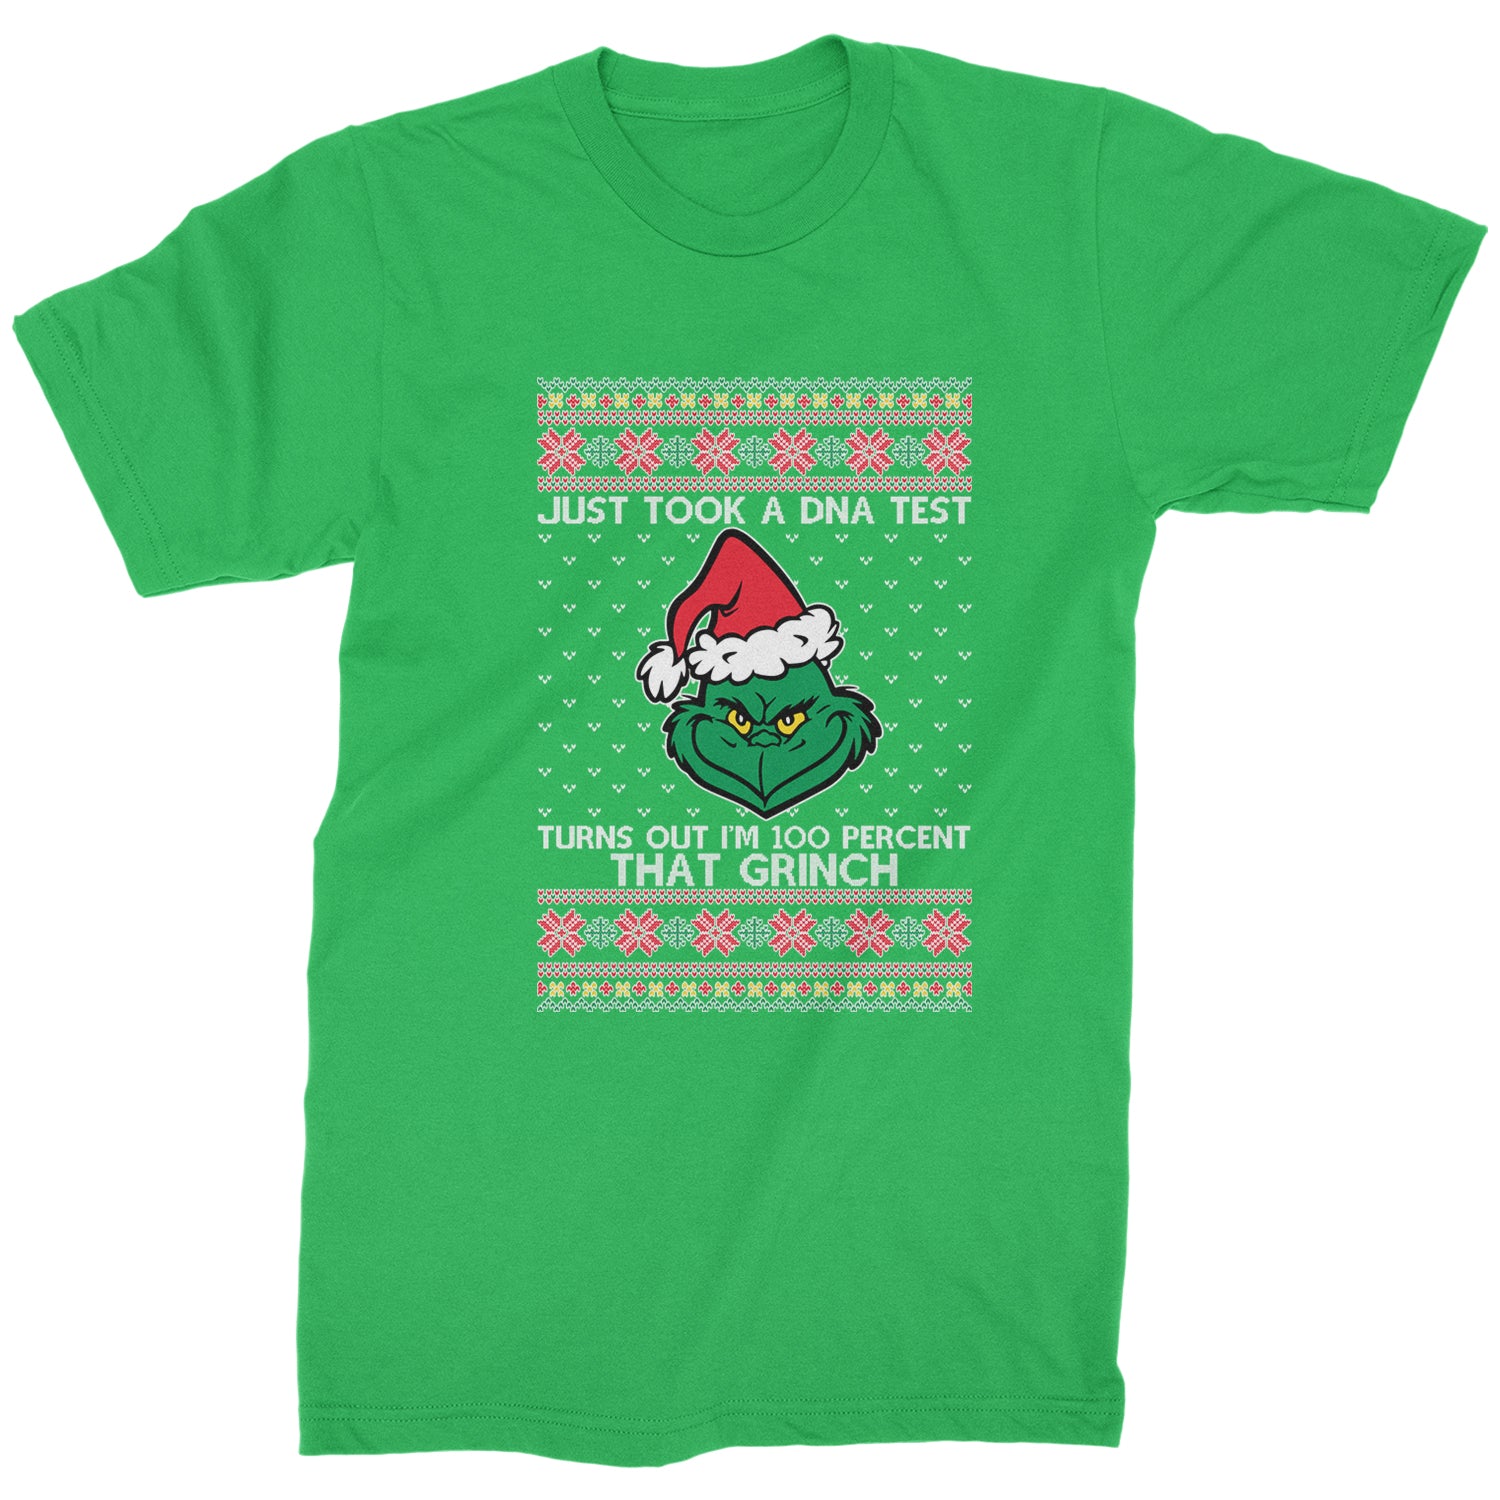 One Hundred Percent That Grinch Mens T-shirt christmas, grinch, sweater, sweatshirt, ugly, xmas by Expression Tees